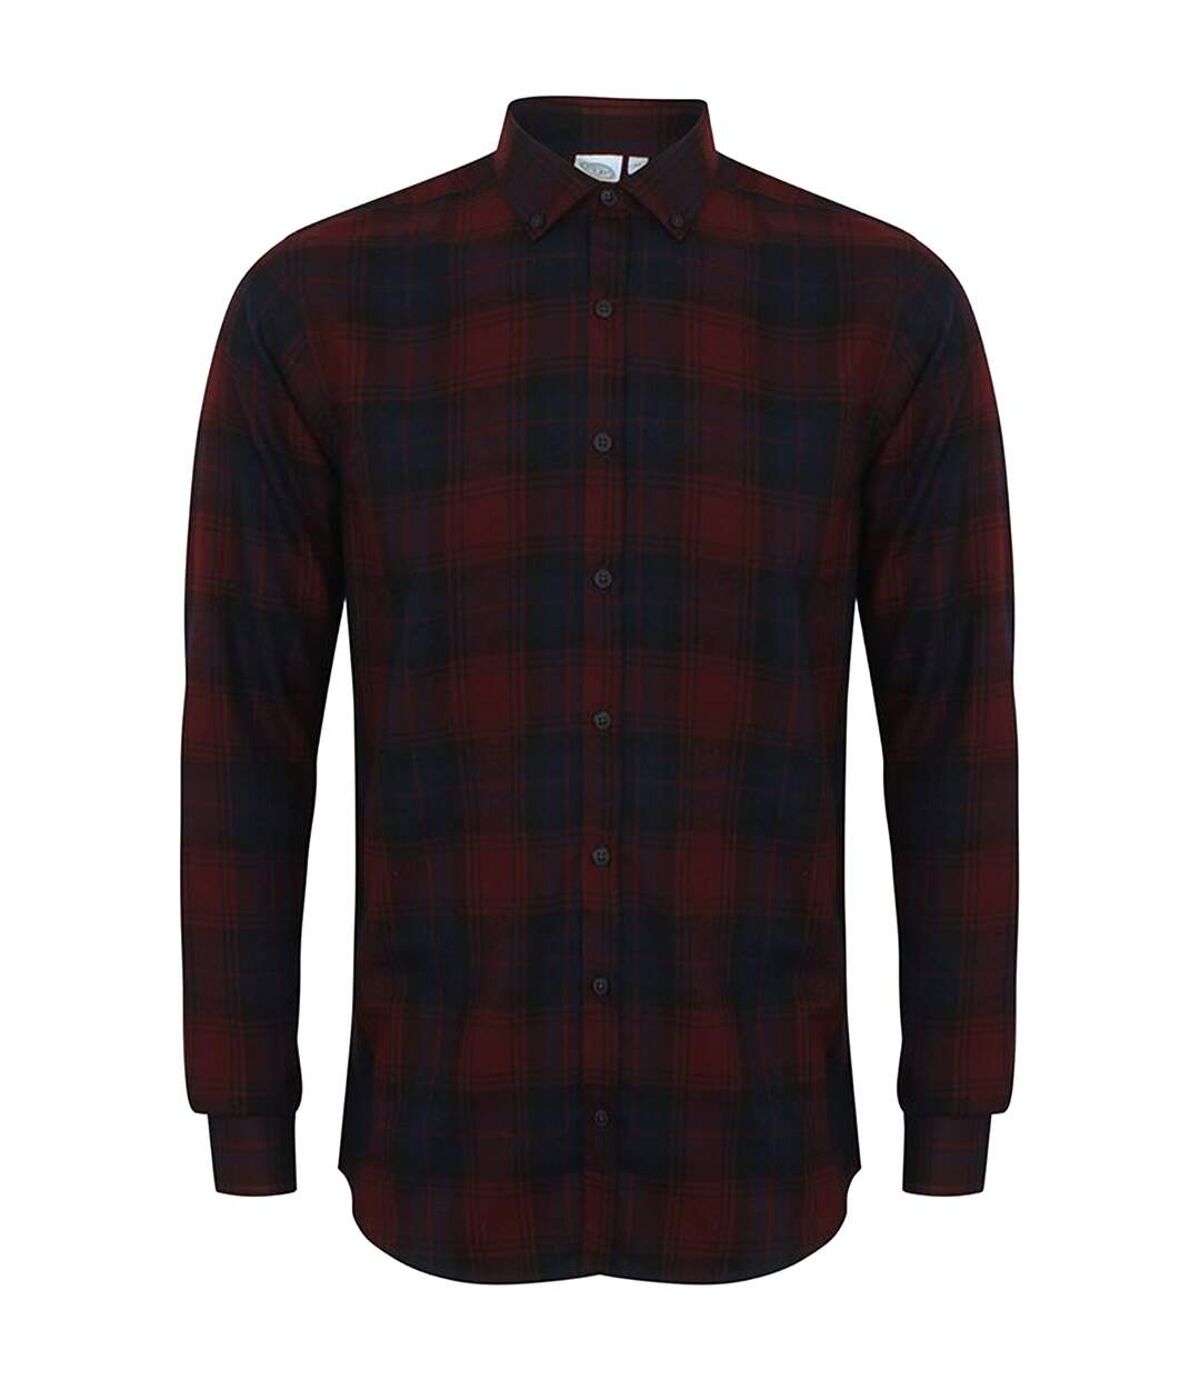 Skinni Fit Mens Brushed Check Casual Long Sleeve Shirt (Burgundy Check)